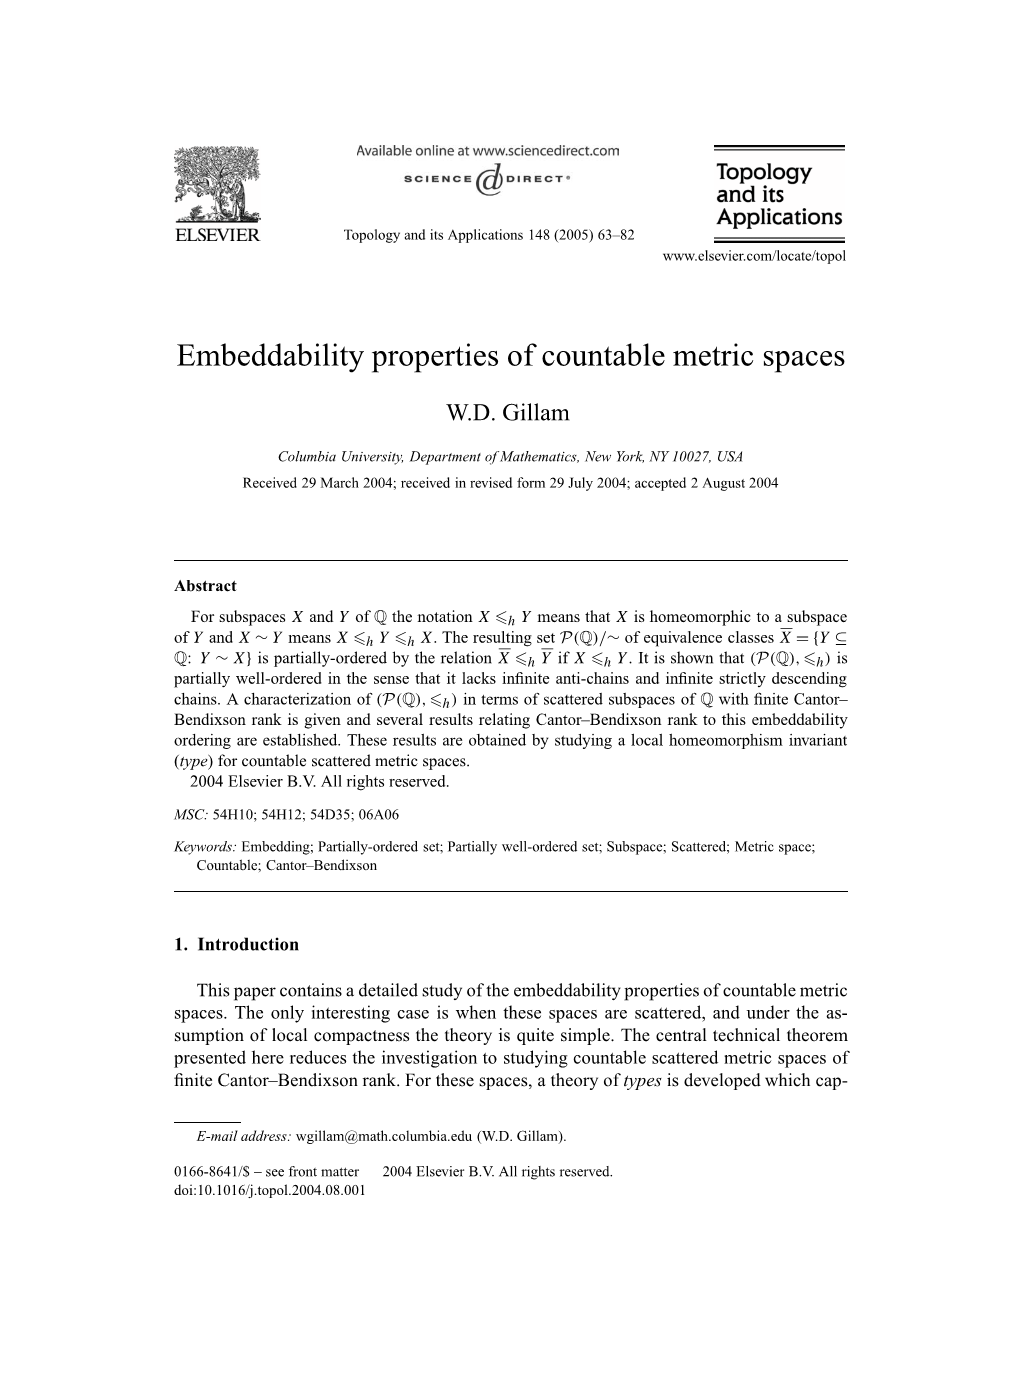 Embeddability Properties of Countable Metric Spaces